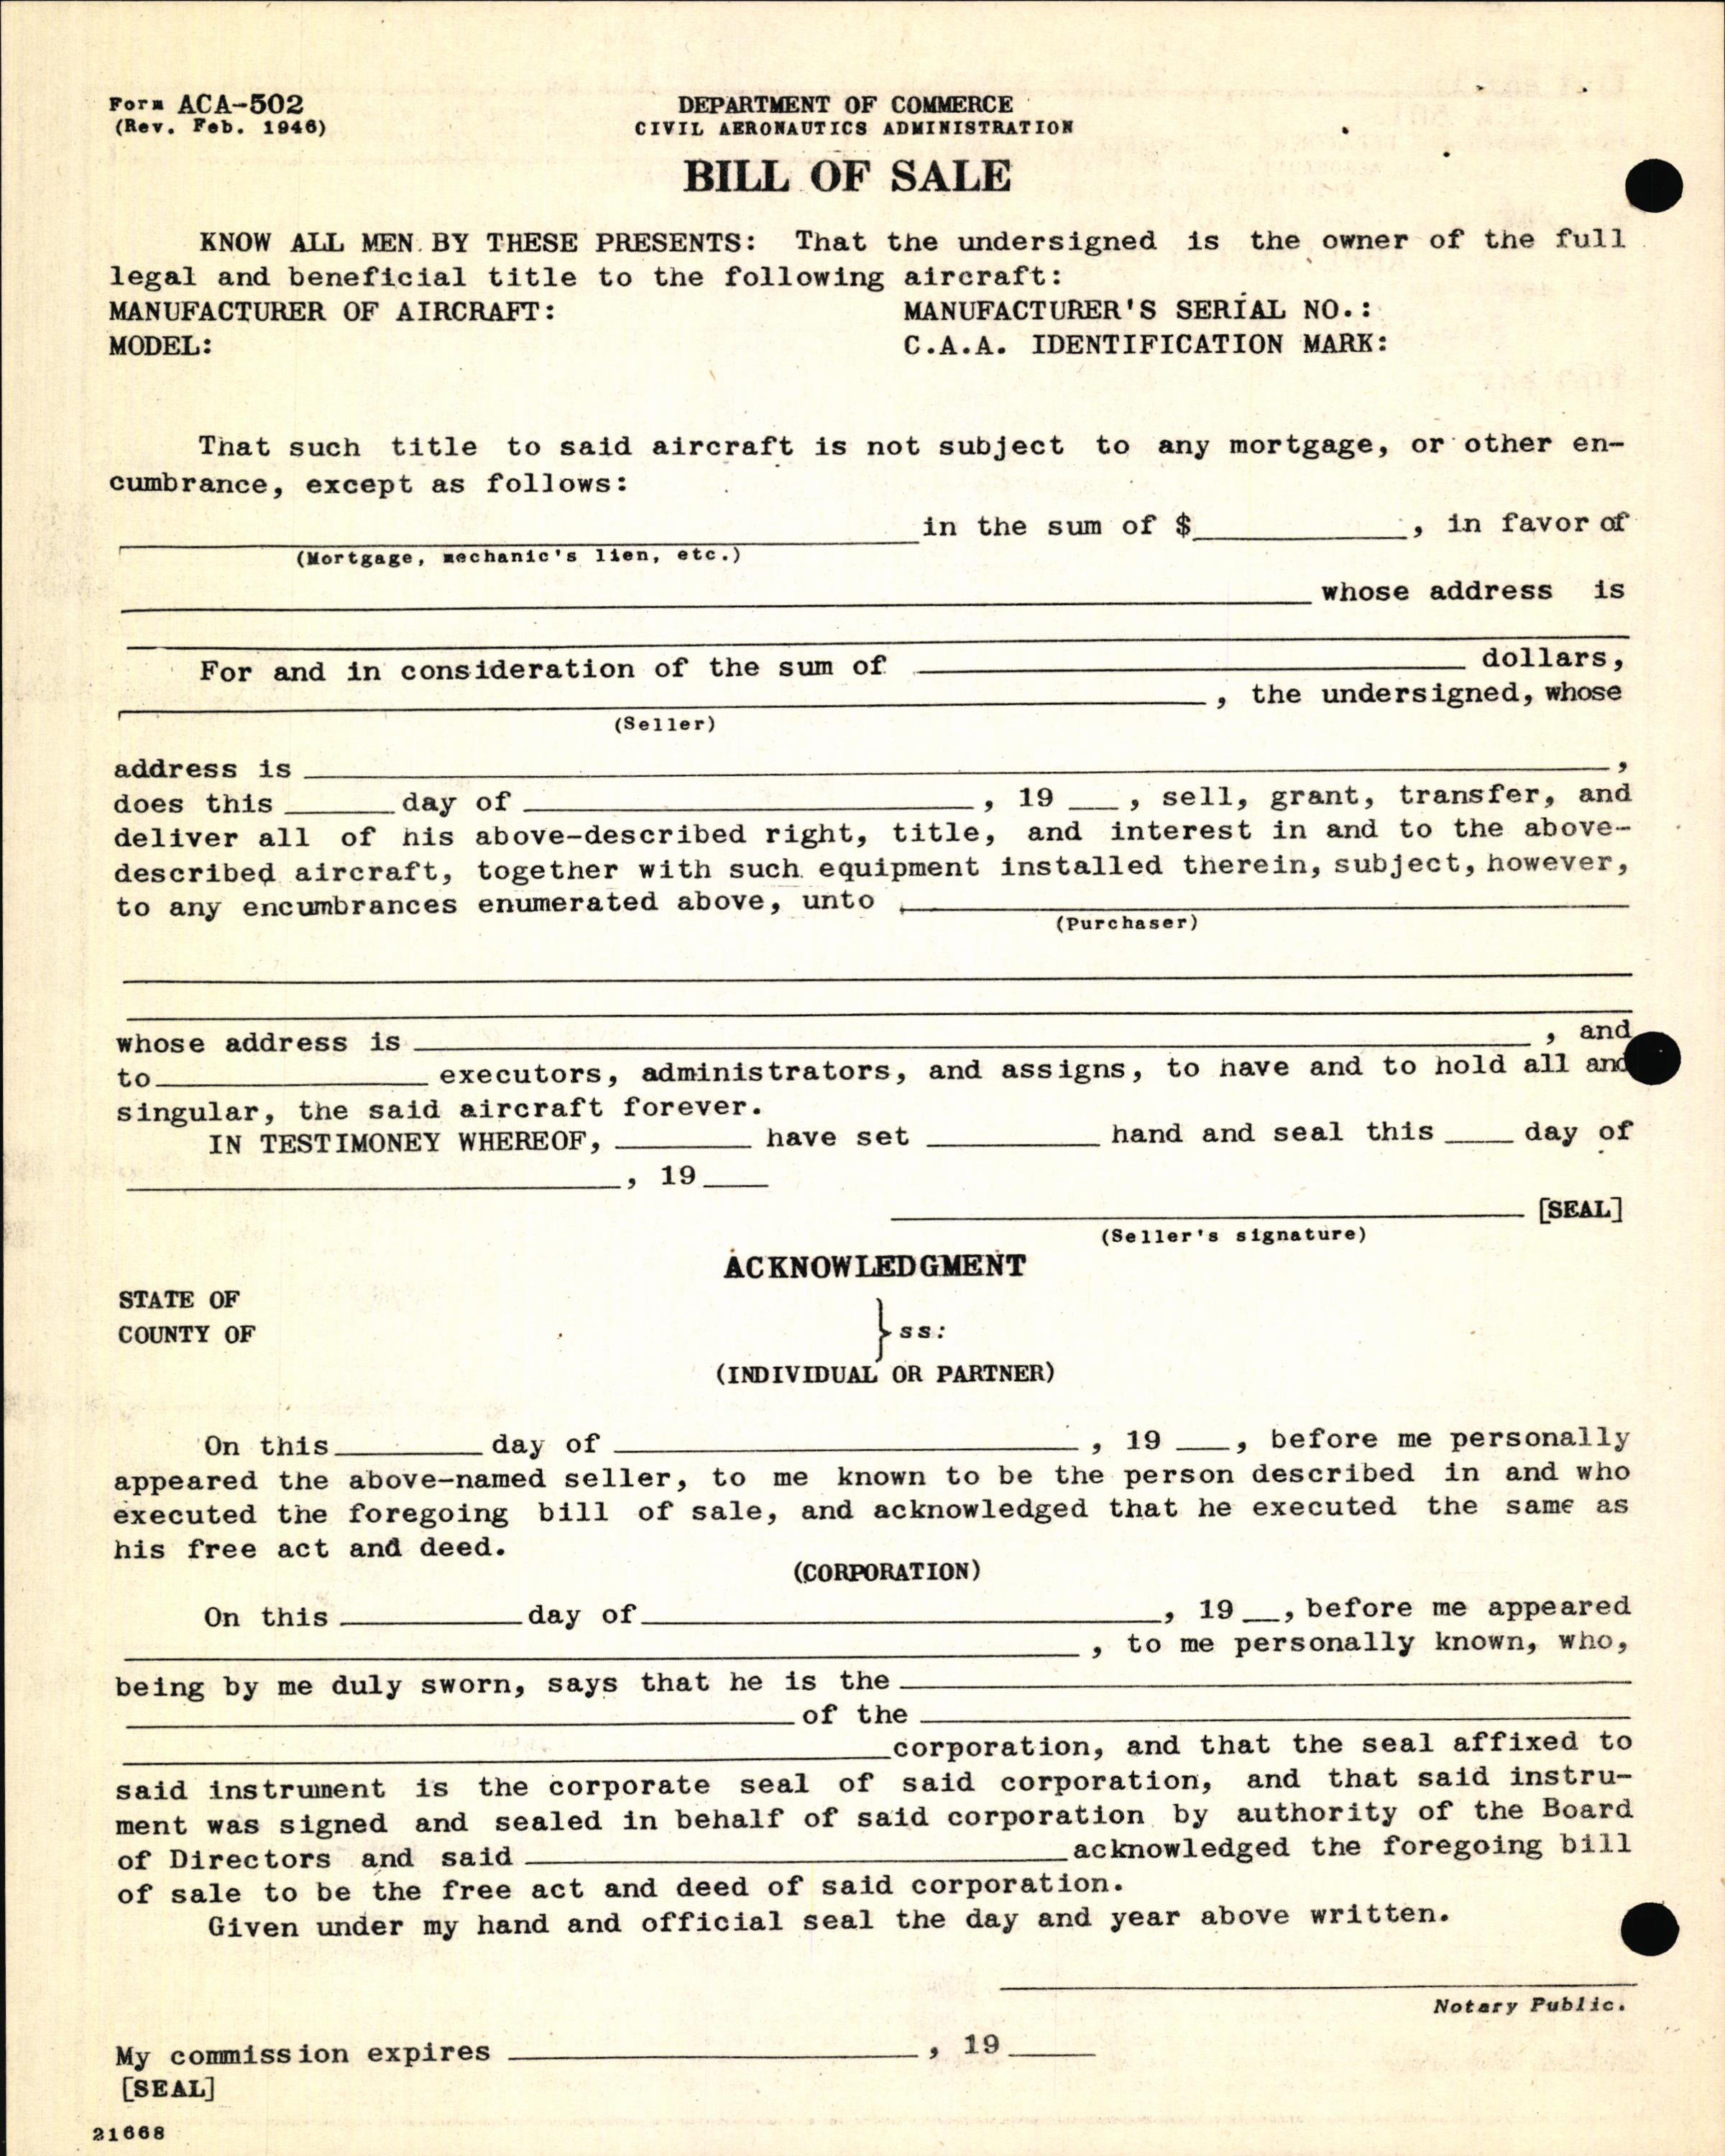 Sample page 6 from AirCorps Library document: Technical Information for Serial Number 1336